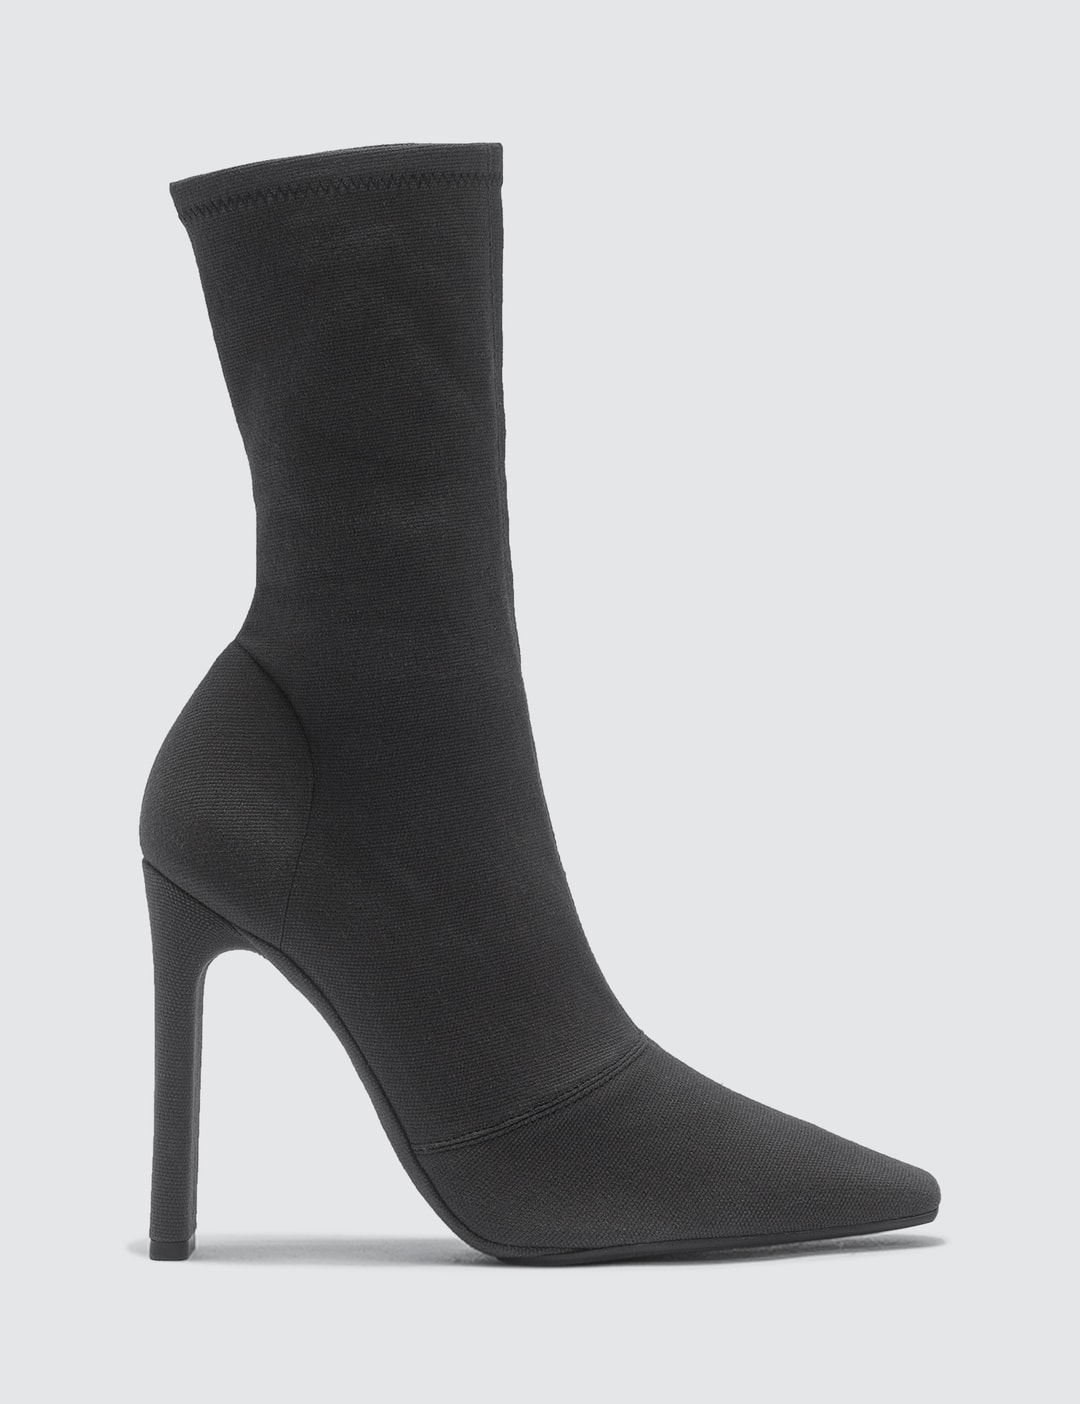 Yeezy - Stretch Ankle Boots 110mm | HBX - Globally Curated Fashion and ...